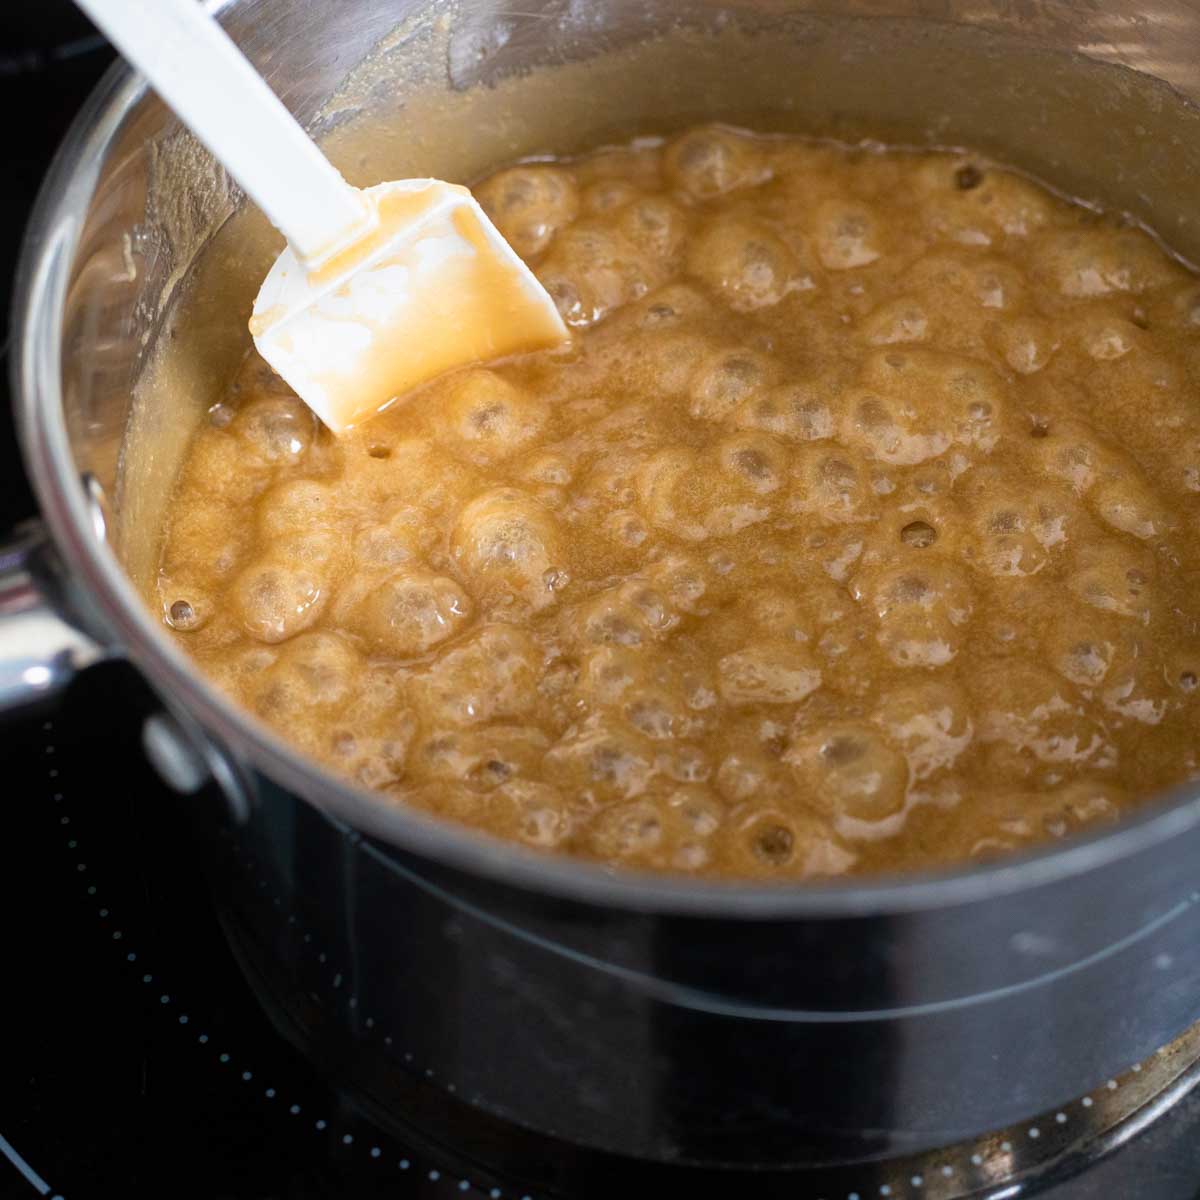 The brown sugar and Karo syrup are bubbling and a white spatula is stirring the mixture.